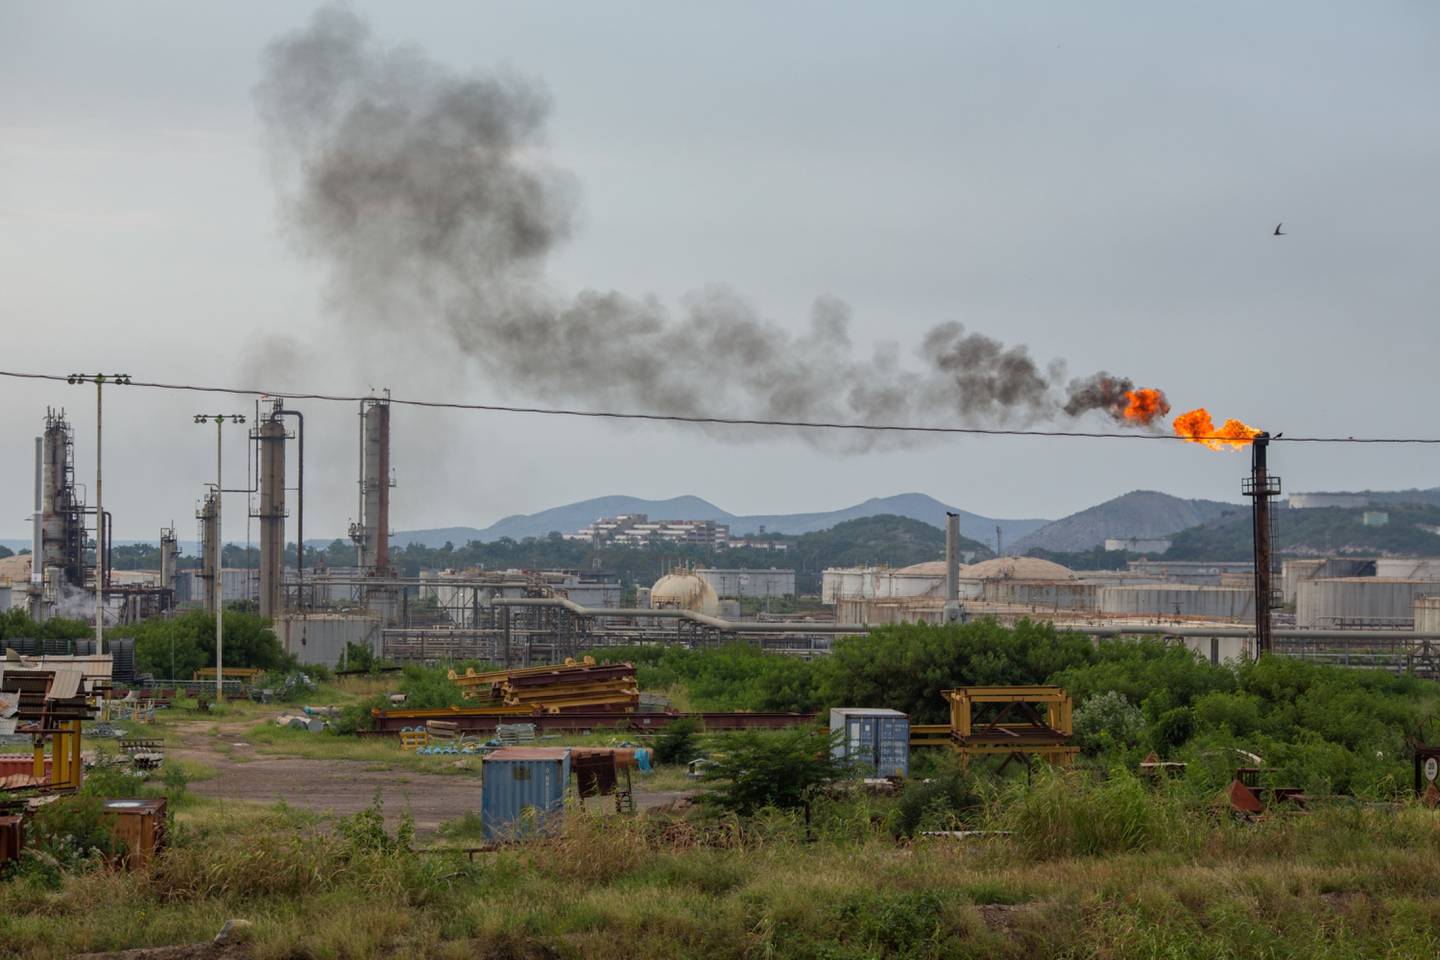 The Puerto La Cruz refinery in Puerto La Cruz, Venezuela, on Wednesday, Oct. 13, 2021. State-owned Petroleos de Venezuela SA has been pumping about 908,000 barrels a day in the past week, but to reach that milestone they have resorted to desperate measures such as handing out contracts to little-known local companies with the promise of payments in scrap metal or backpacks stuffed with U.S. dollars, according to people with direct knowledge of the matter. Photographer: Manaure Quintero/Bloomberg